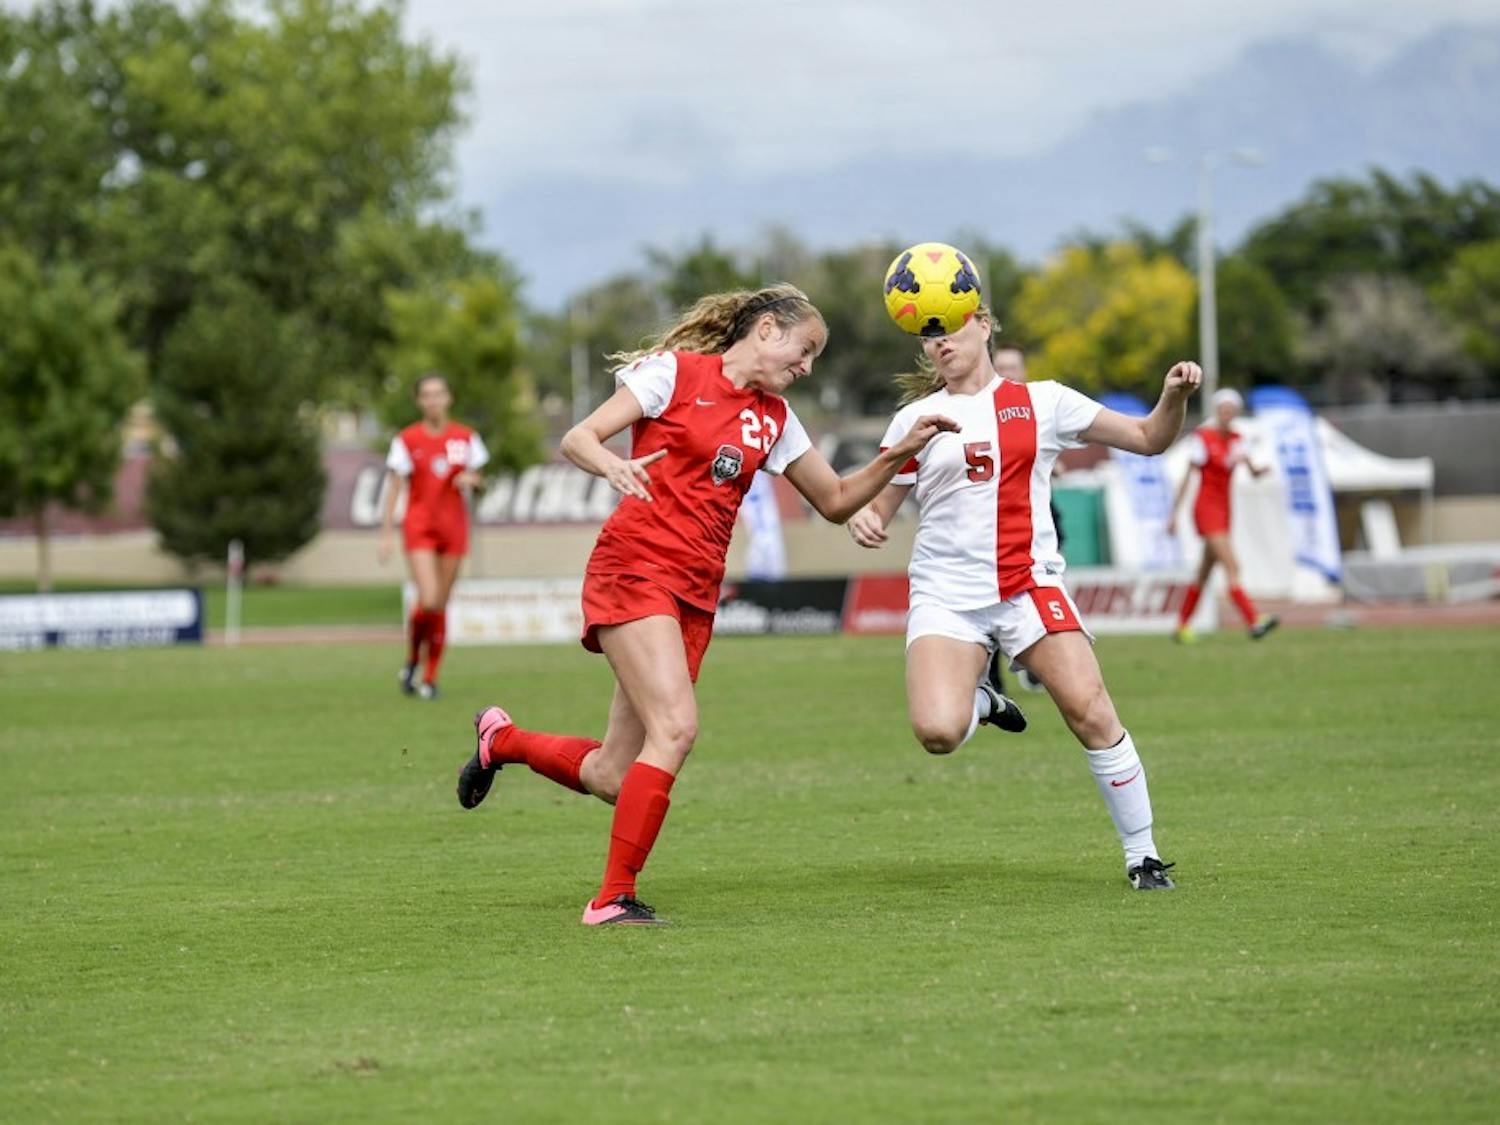 UNM midfielder Alyssa Coonrod headbutts a soccer ball on Oct. 10, 2015 against a University of Nevada Las Vegas player. This year, 2017, marks 25 years of women?s soccer history at UNM.